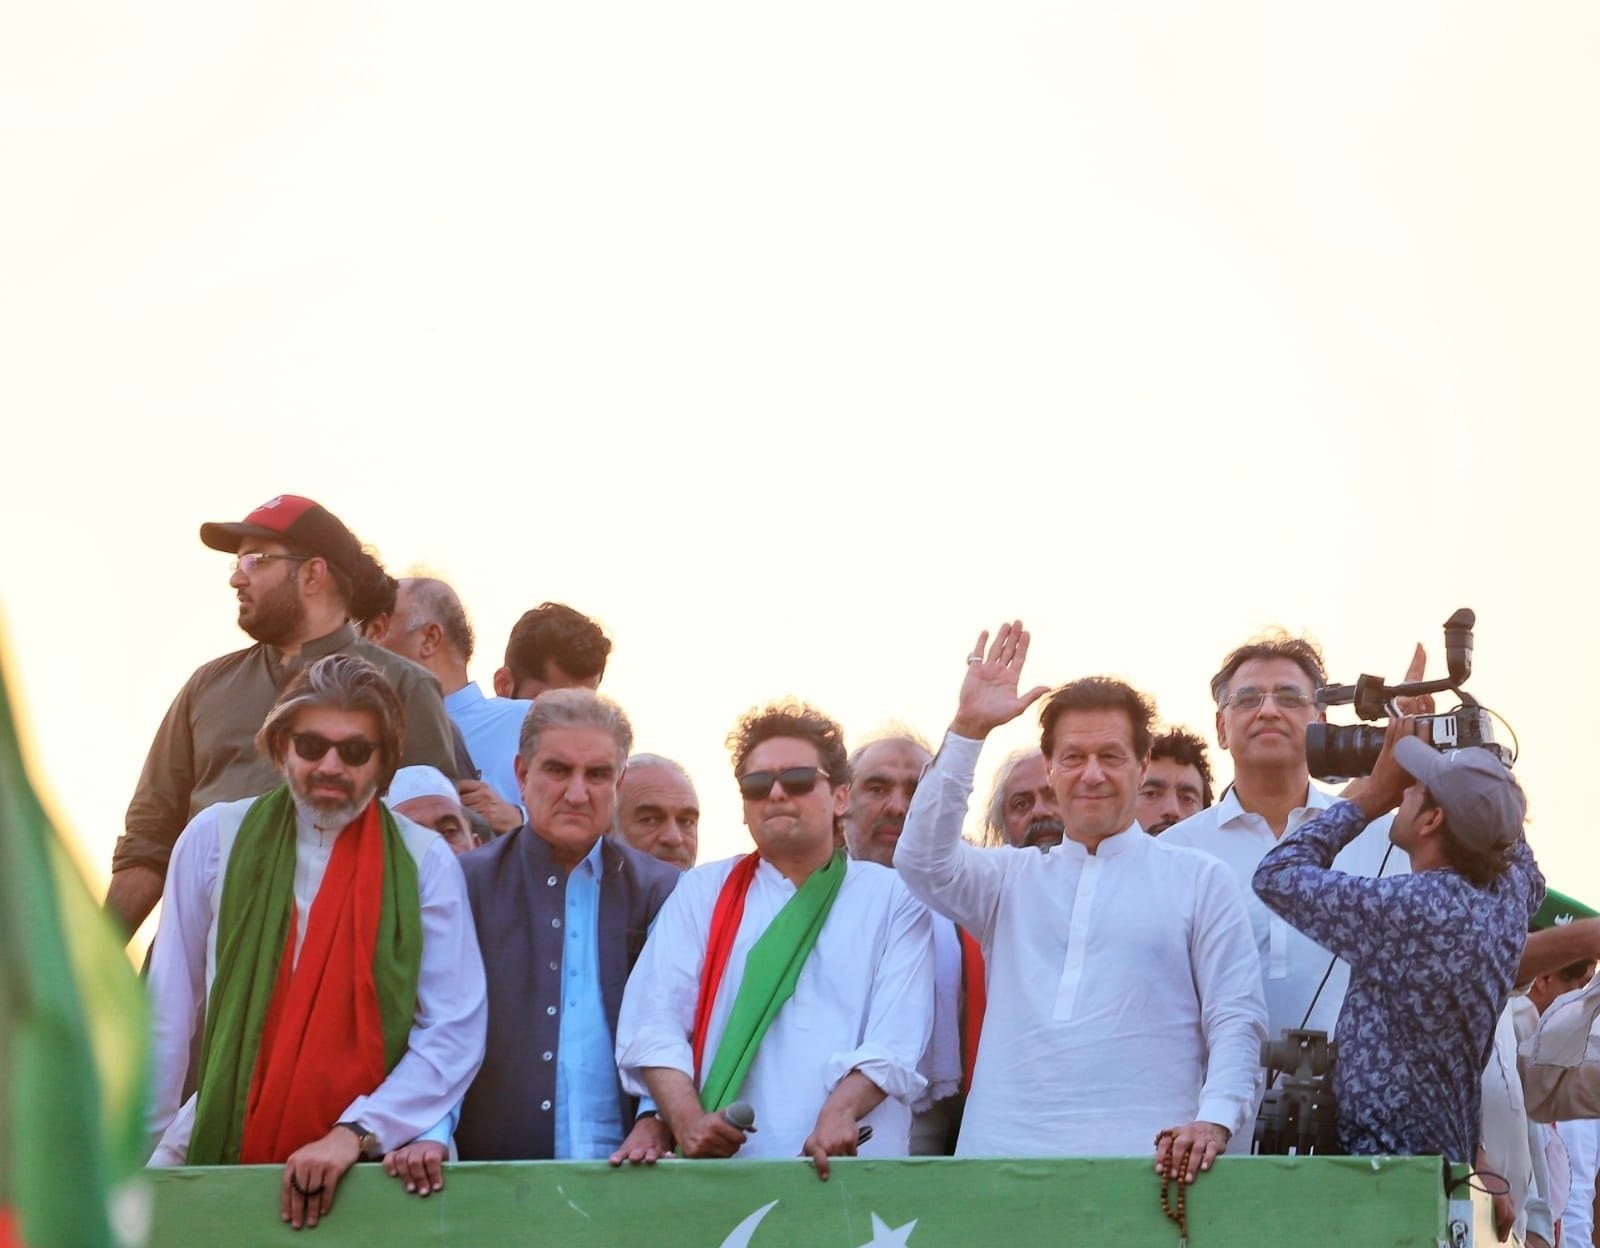 'Our people had pistols': Khan admits PTI workers had weapons in Azadi March